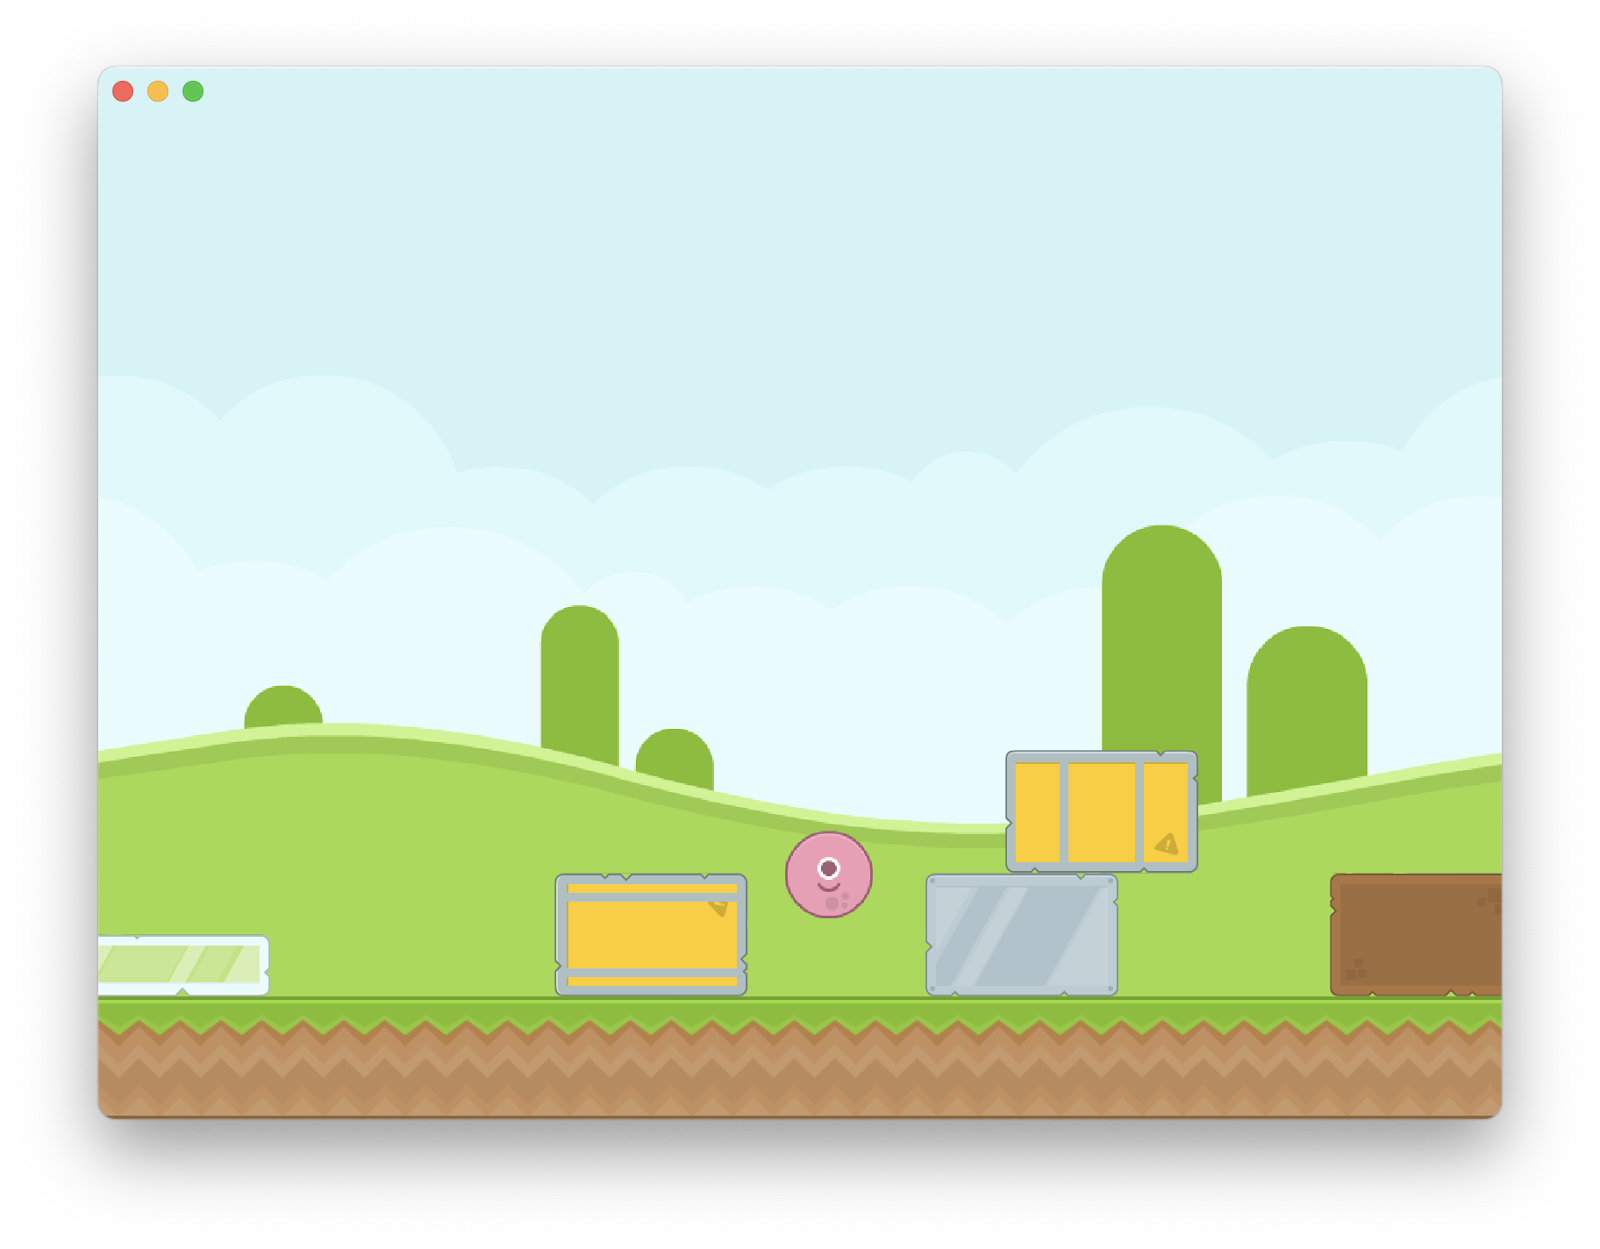 An app window with green hills in the background, ground layer, blocks on the ground and a player avatar in flight.